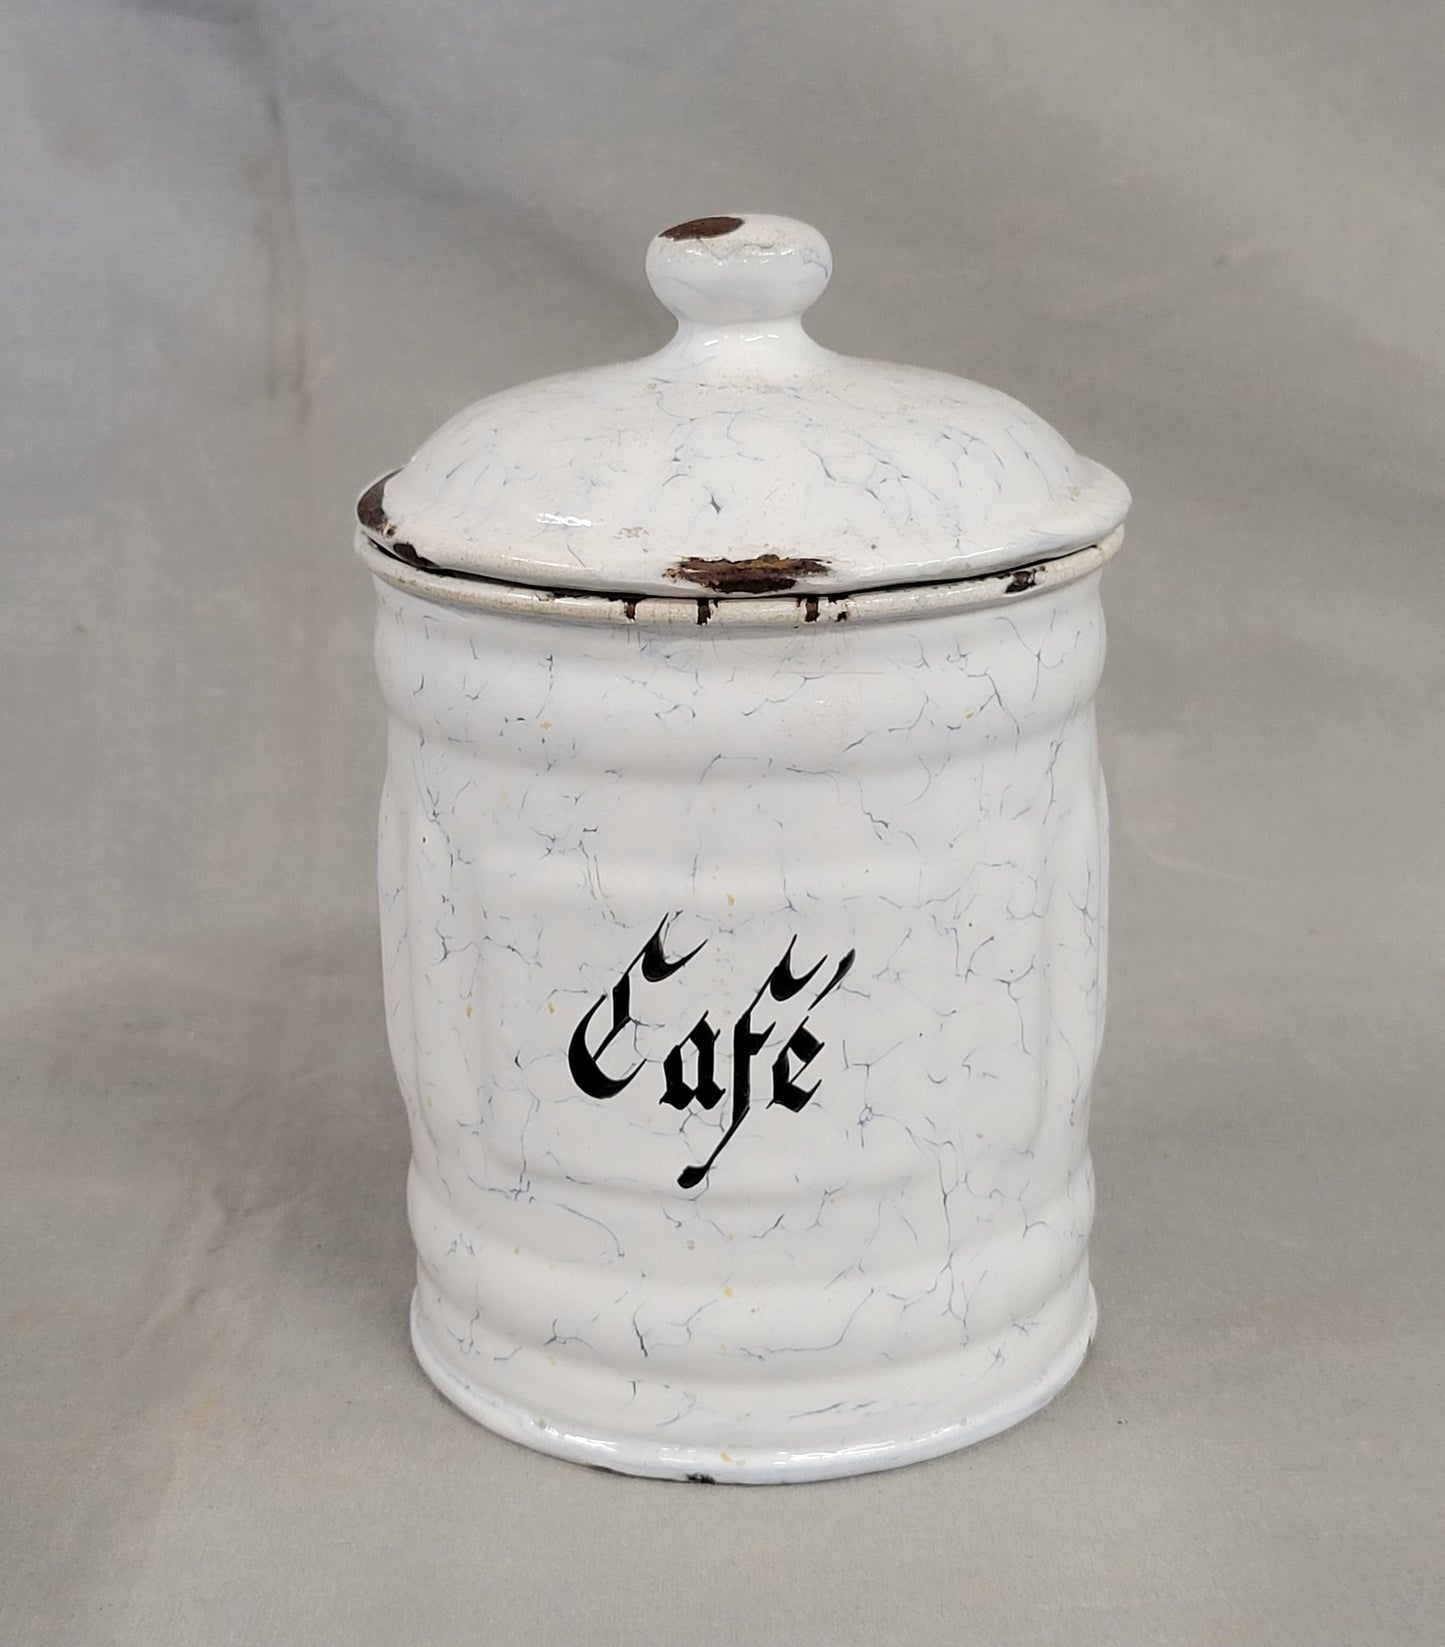 Antique French White and Blue Enamel Canister Set - 6 Pieces